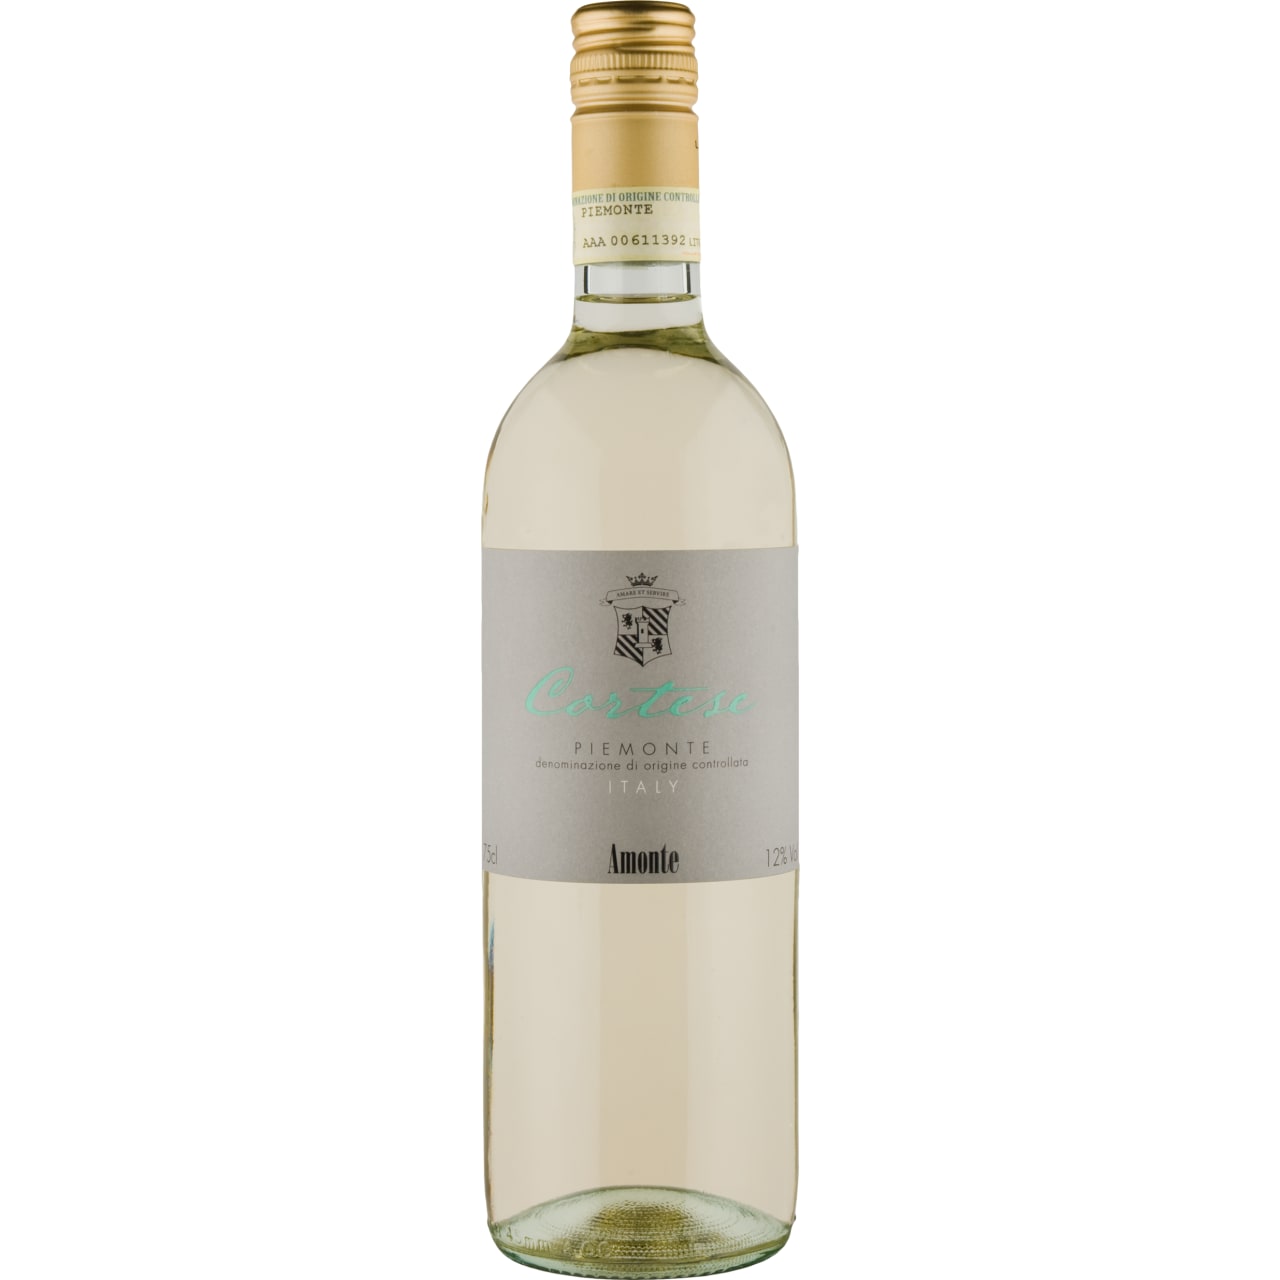 Cortese is the grape which makes Gavi and it is famous for its bright lemony freshness.